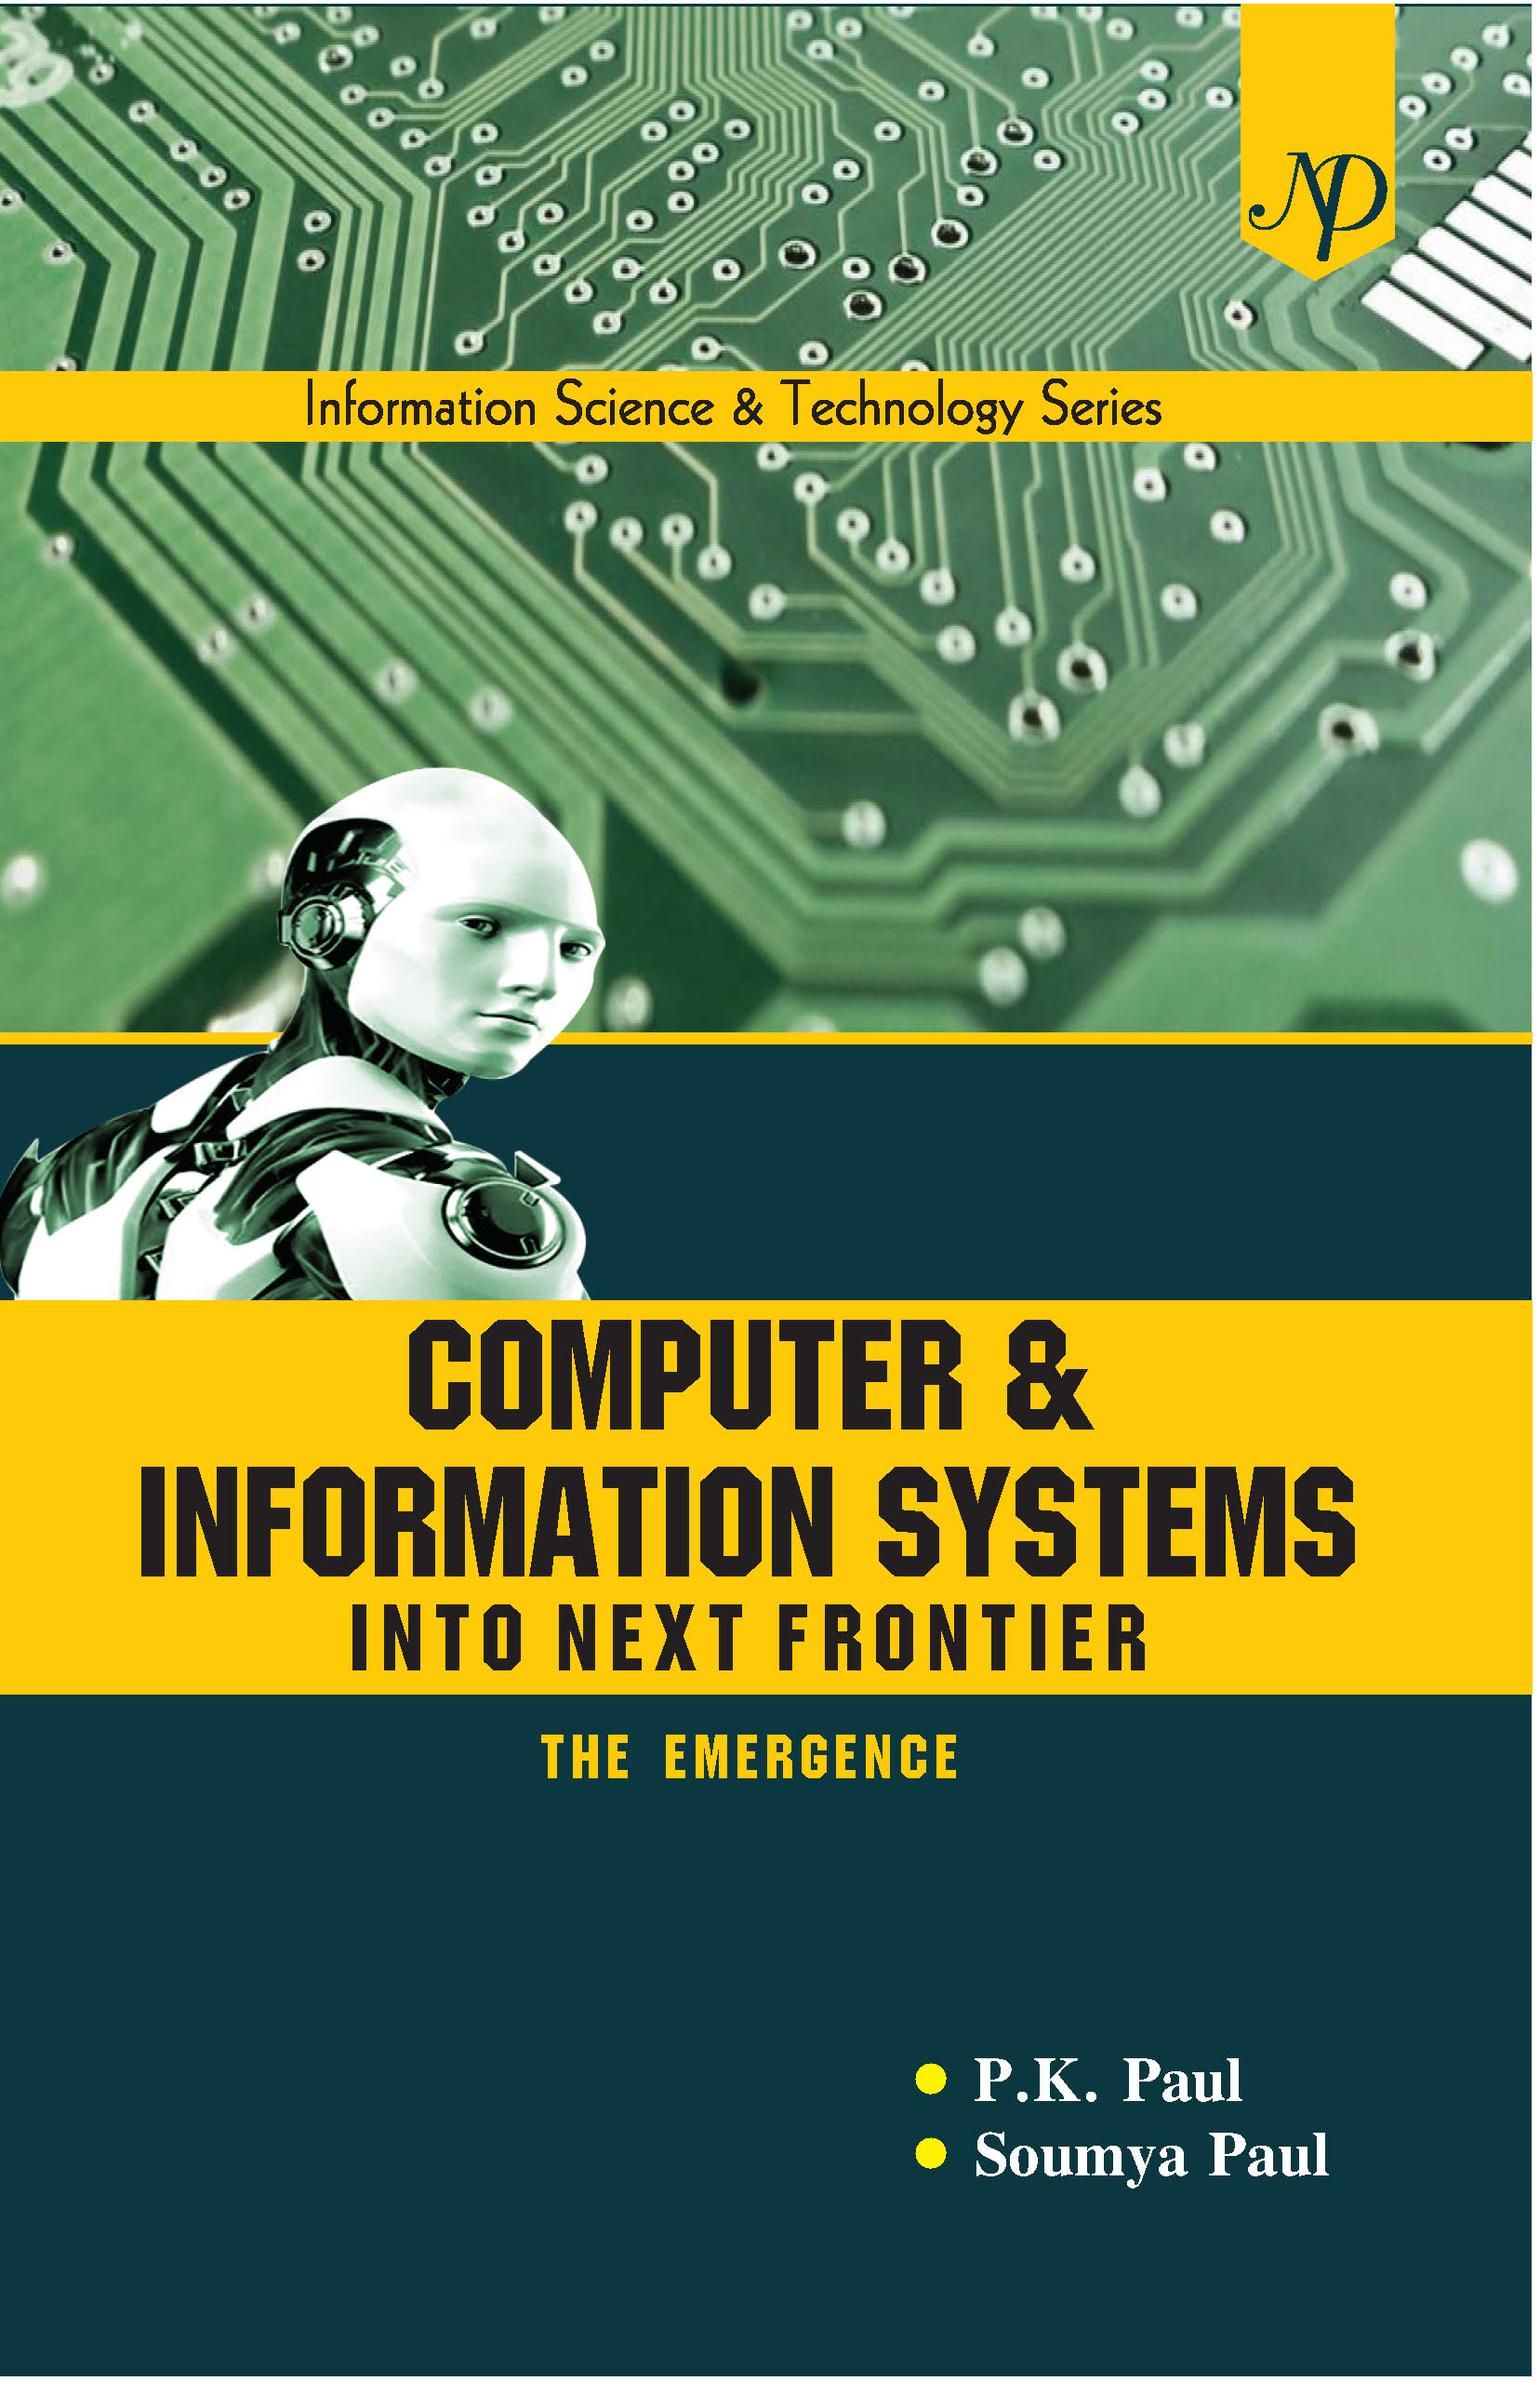 Compute & Information system into next fronteir cover.jpg